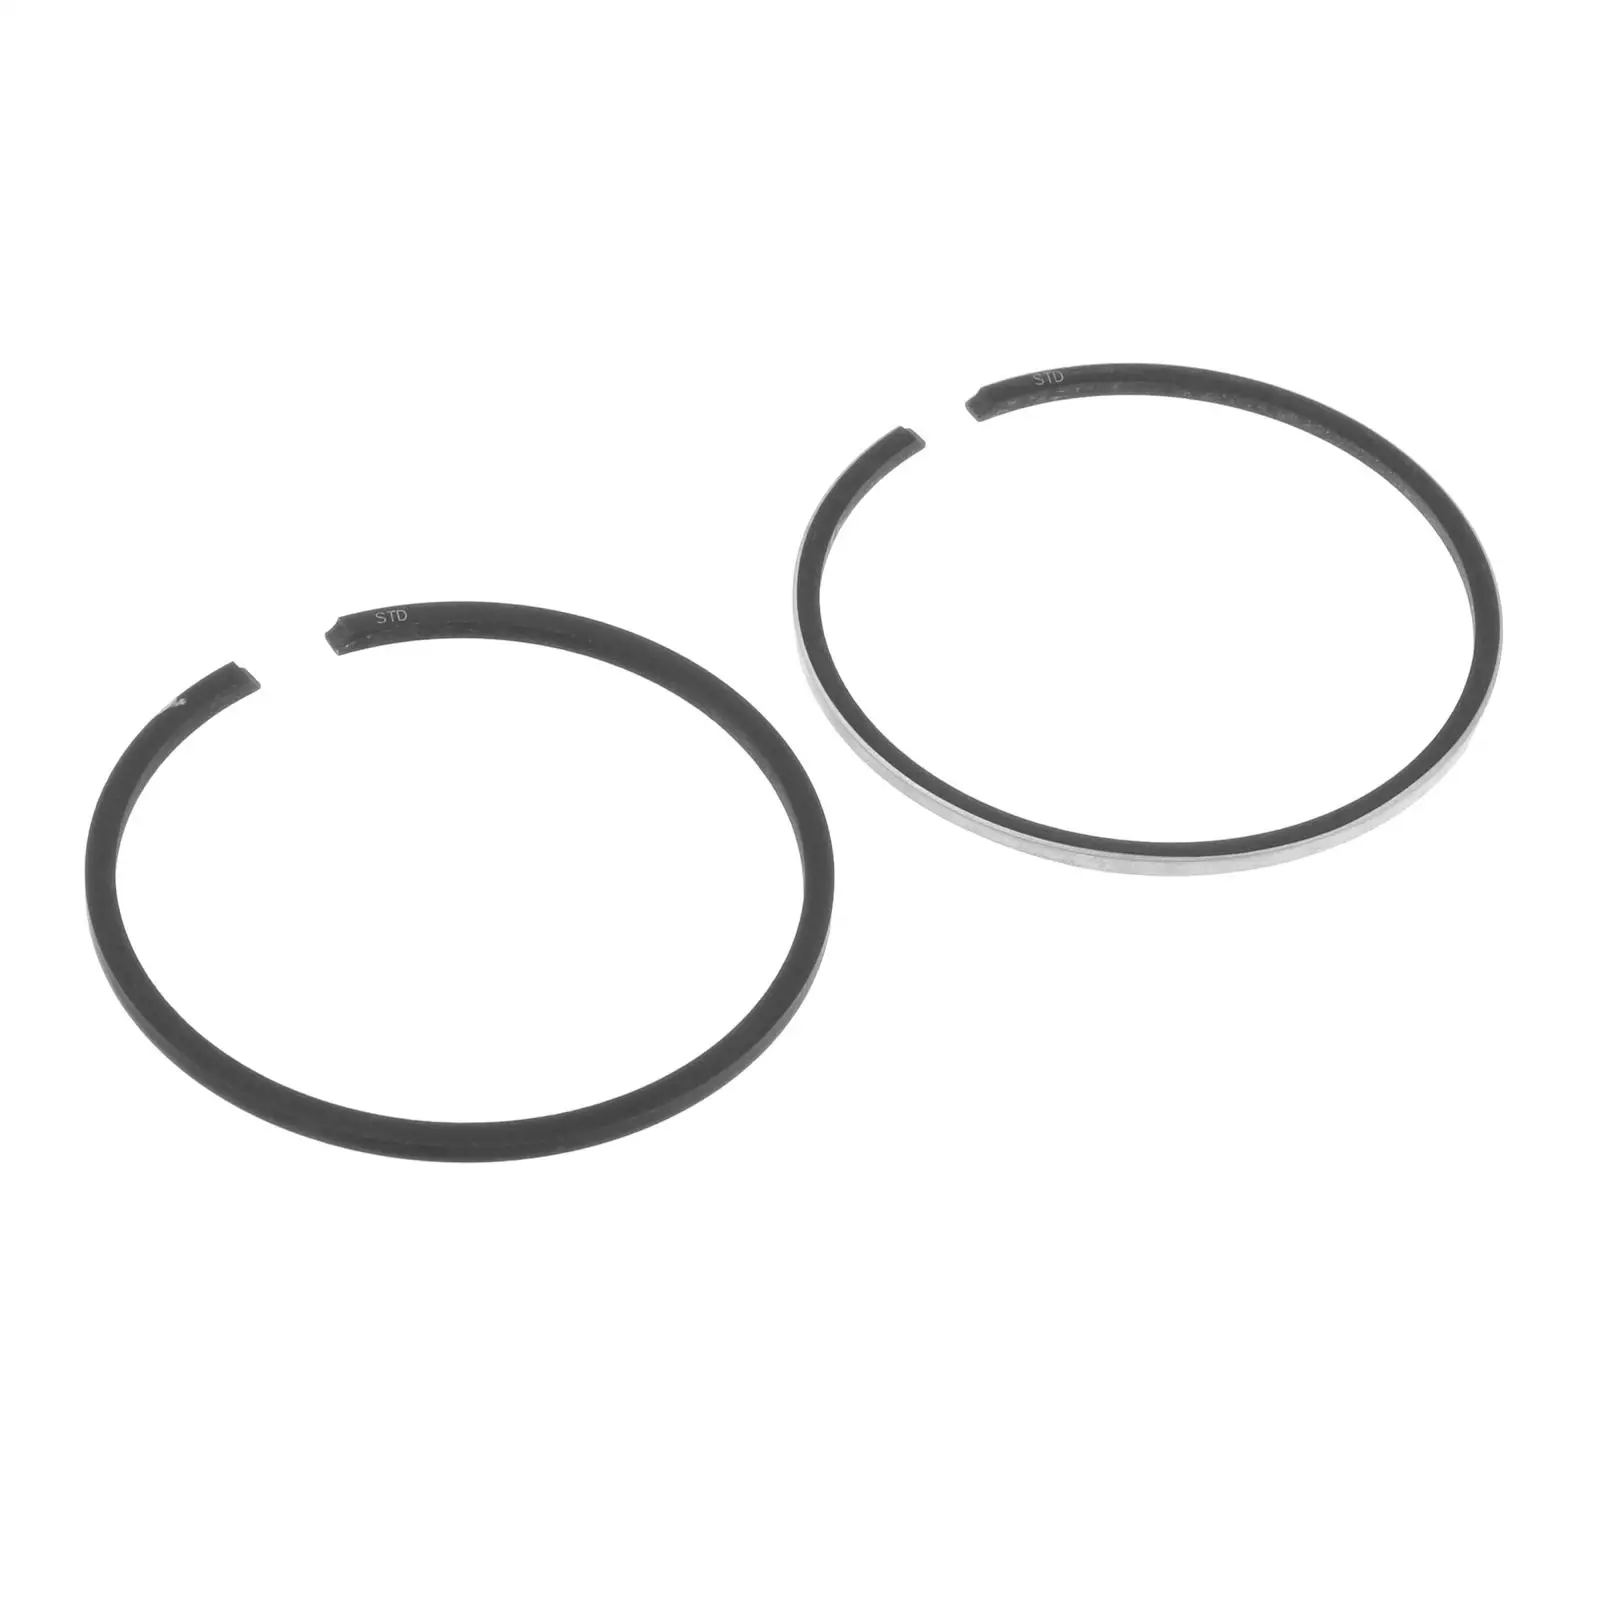 No. 682-11610-01-00 Engine Piston Rings for Hidea 9.9HP 15HP Marine Outboards Motors, Set of 2pcs